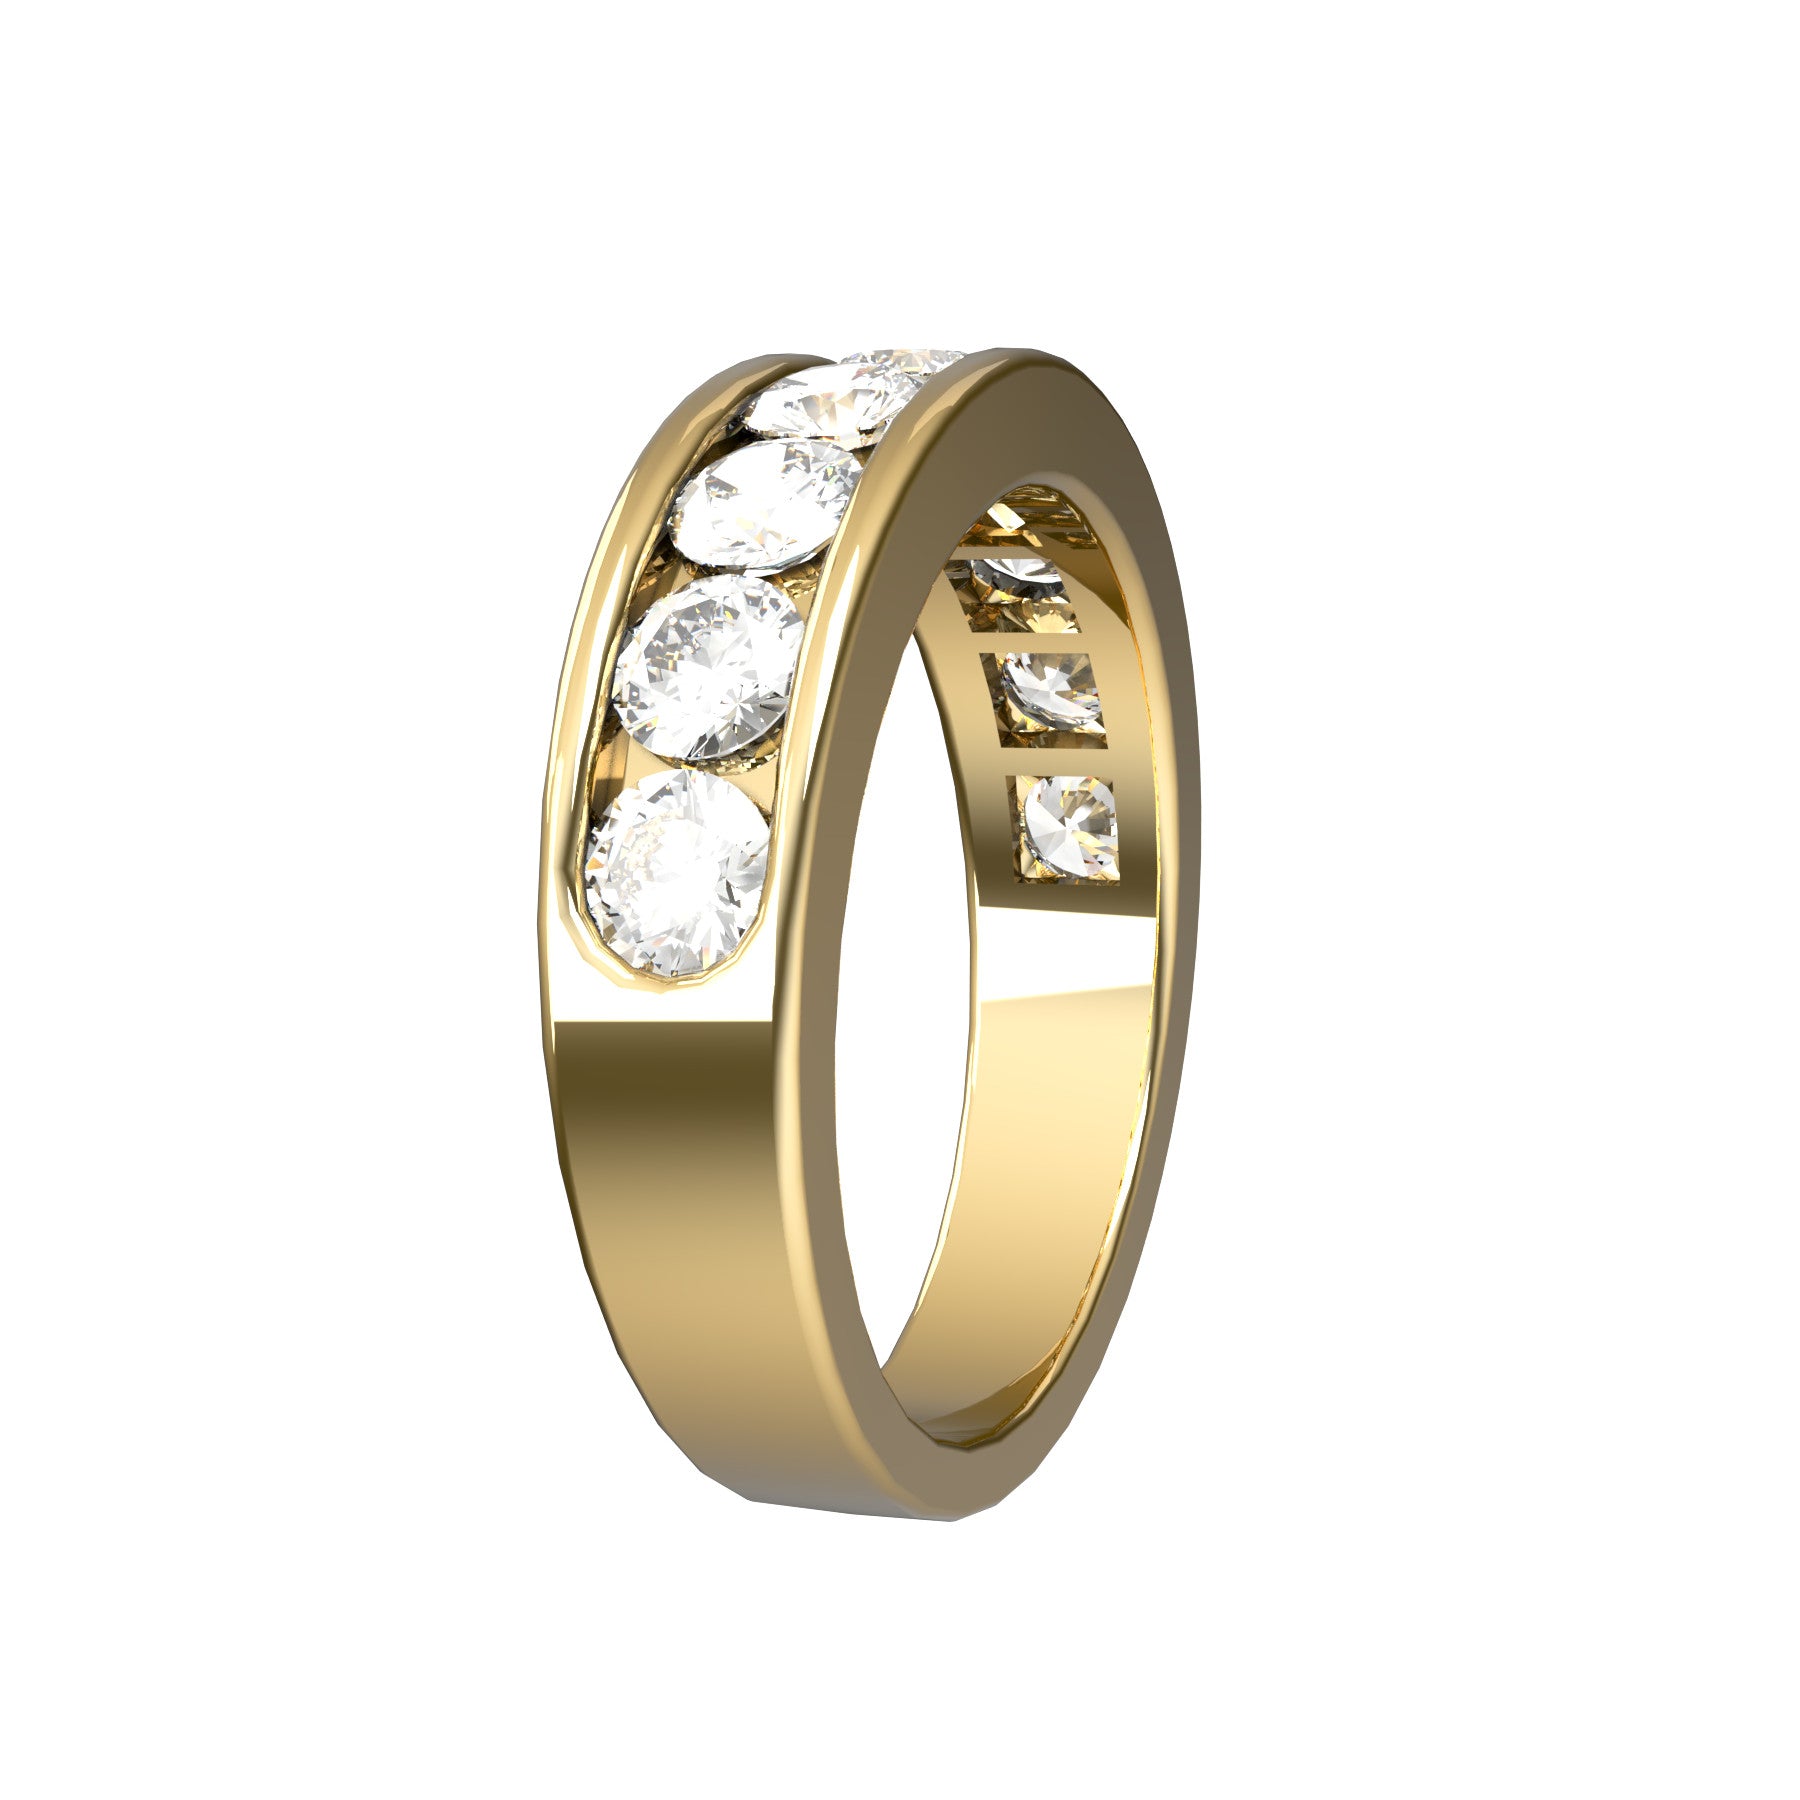 perpetual half wedding ring , 18 K yellow gold, 0,13 ct round natural diamond, weight about 5,6 g. (0.20 oz), width 5,40 mm